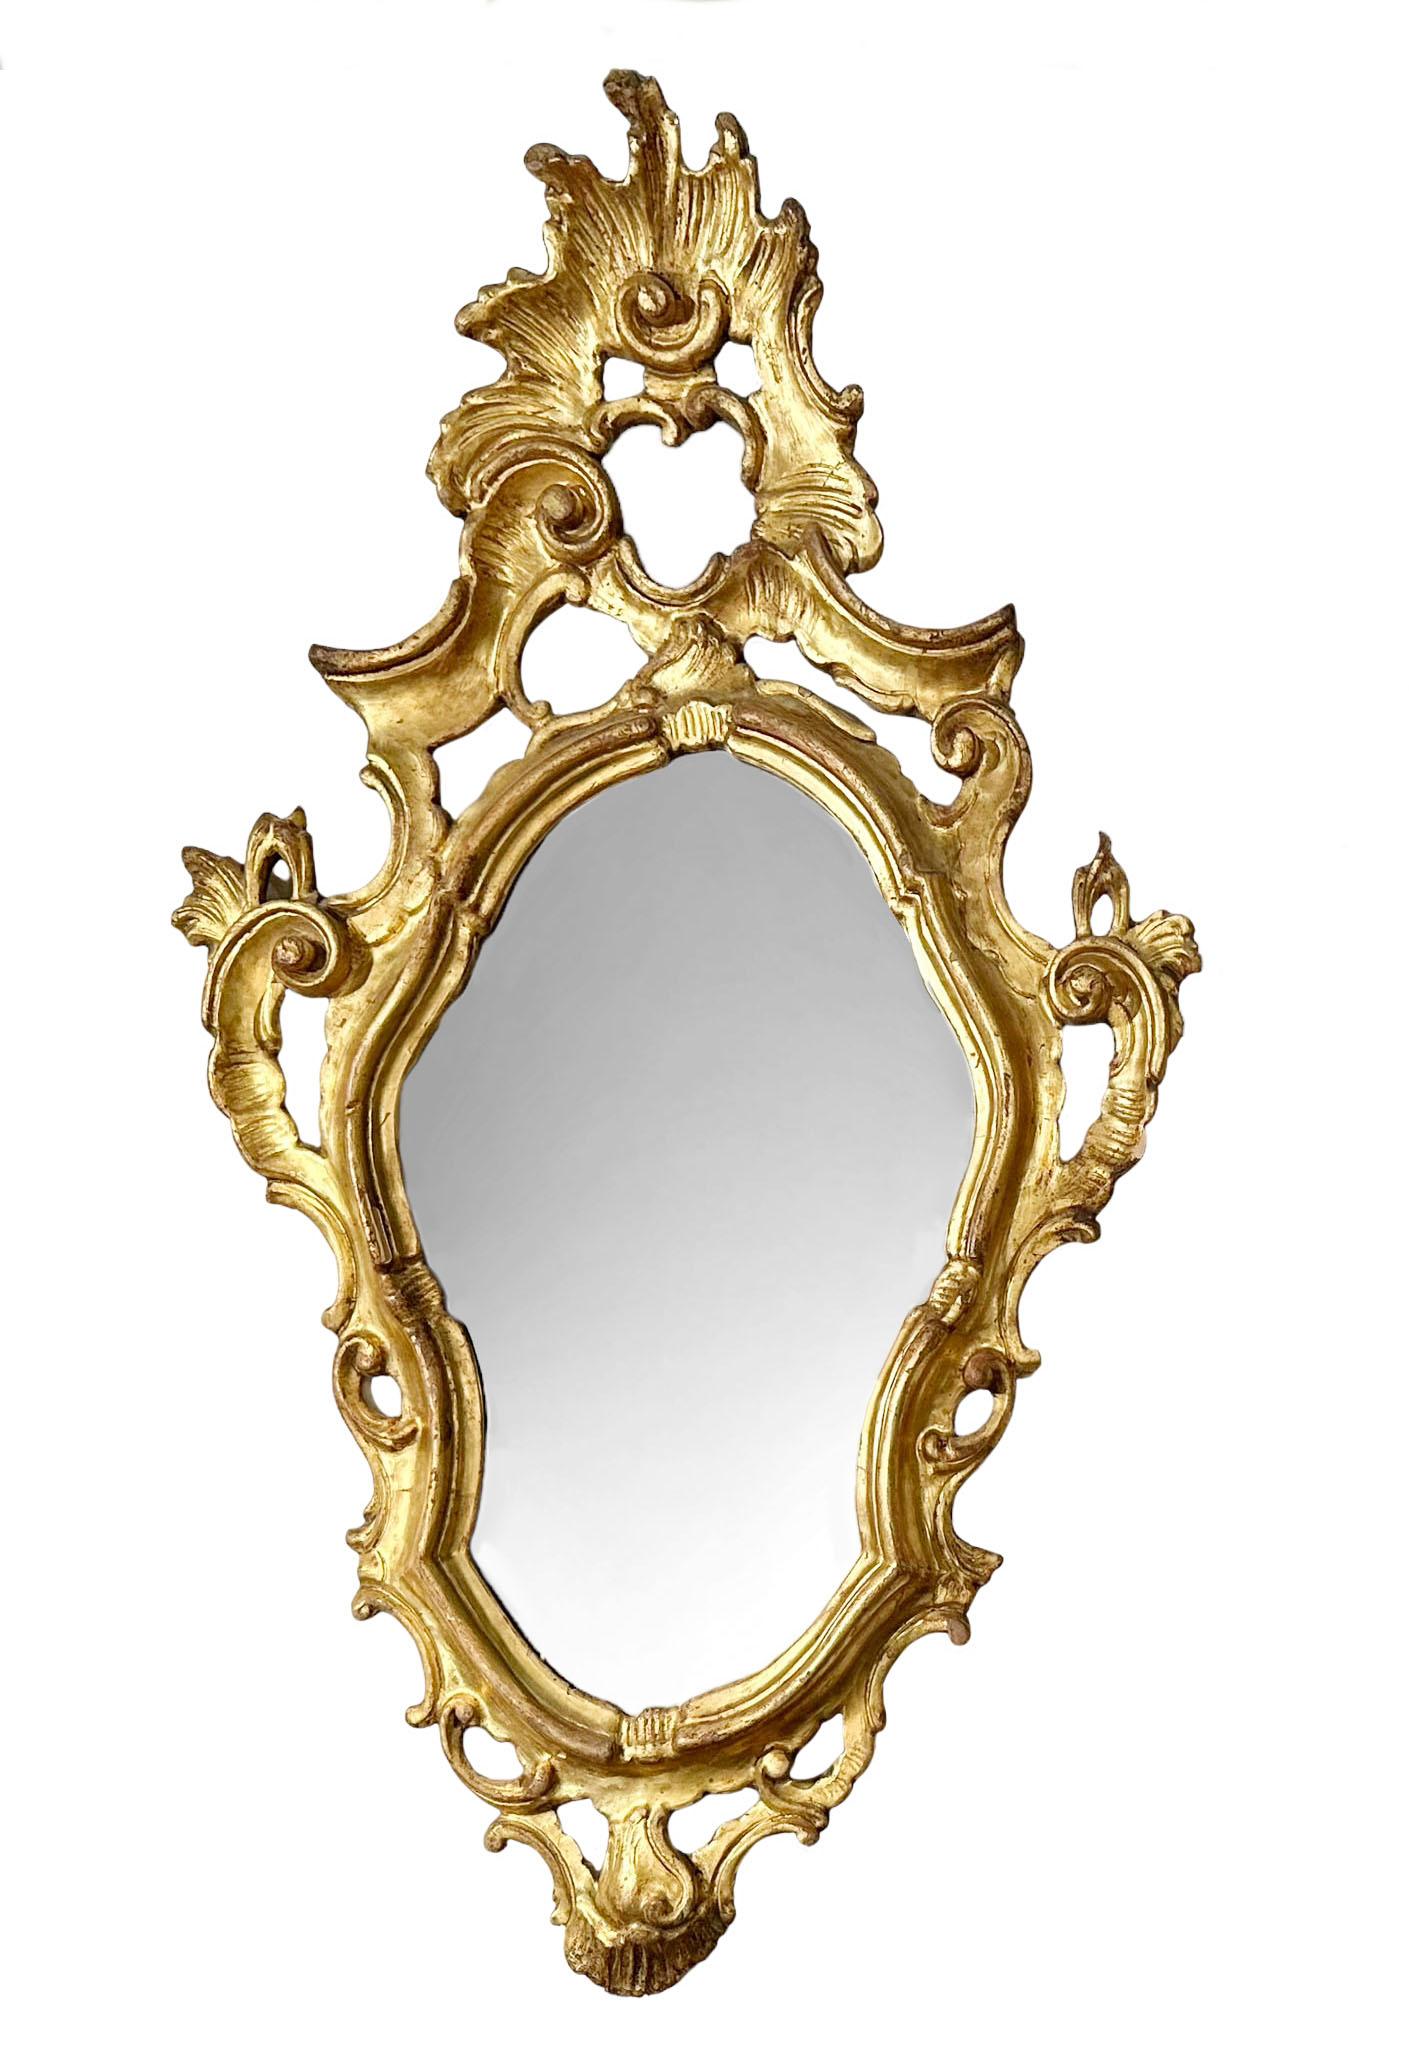 Gilded Italian Rococo Style Mirrors - A Pair In Good Condition For Sale In Tampa, FL